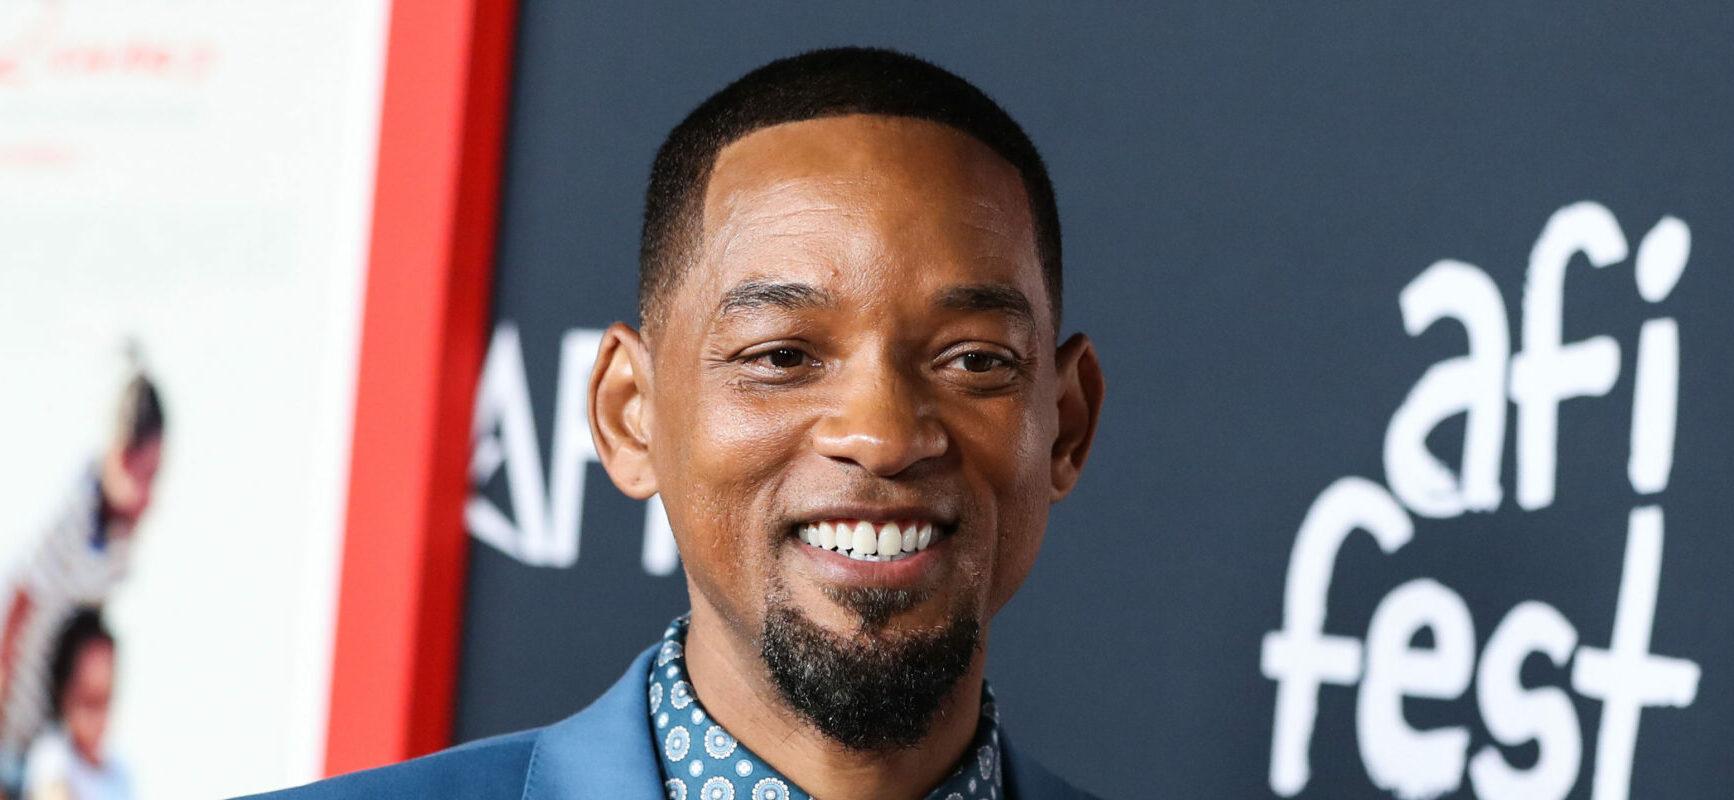 Will Smith Bags First Golden Globes Award For His Work On ‘King Richard’